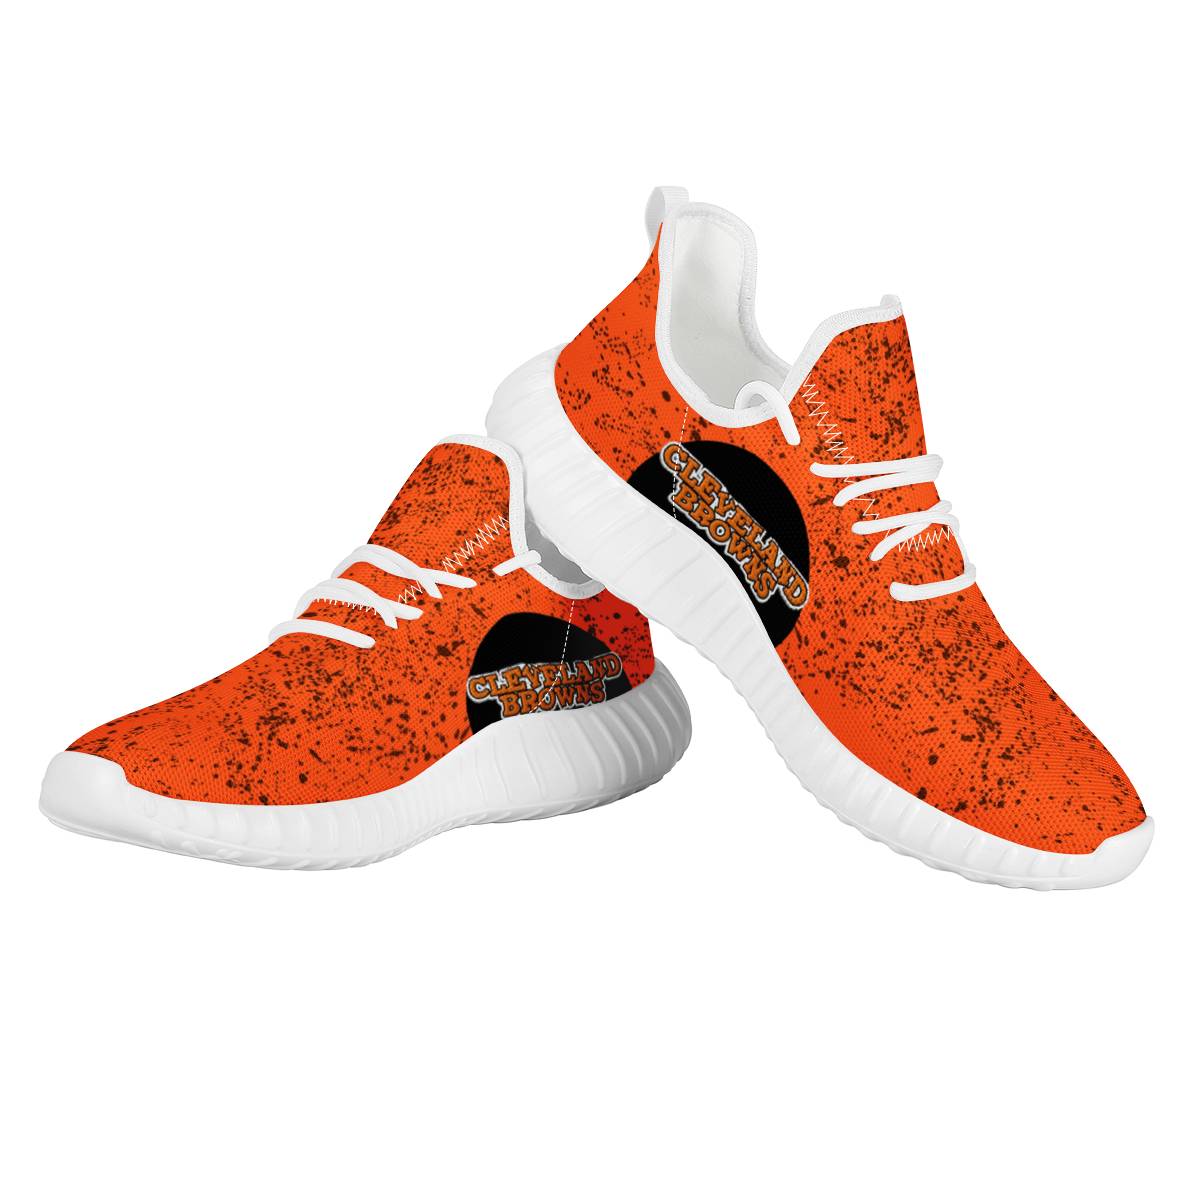 Women's Cleveland Browns Mesh Knit Sneakers/Shoes 002